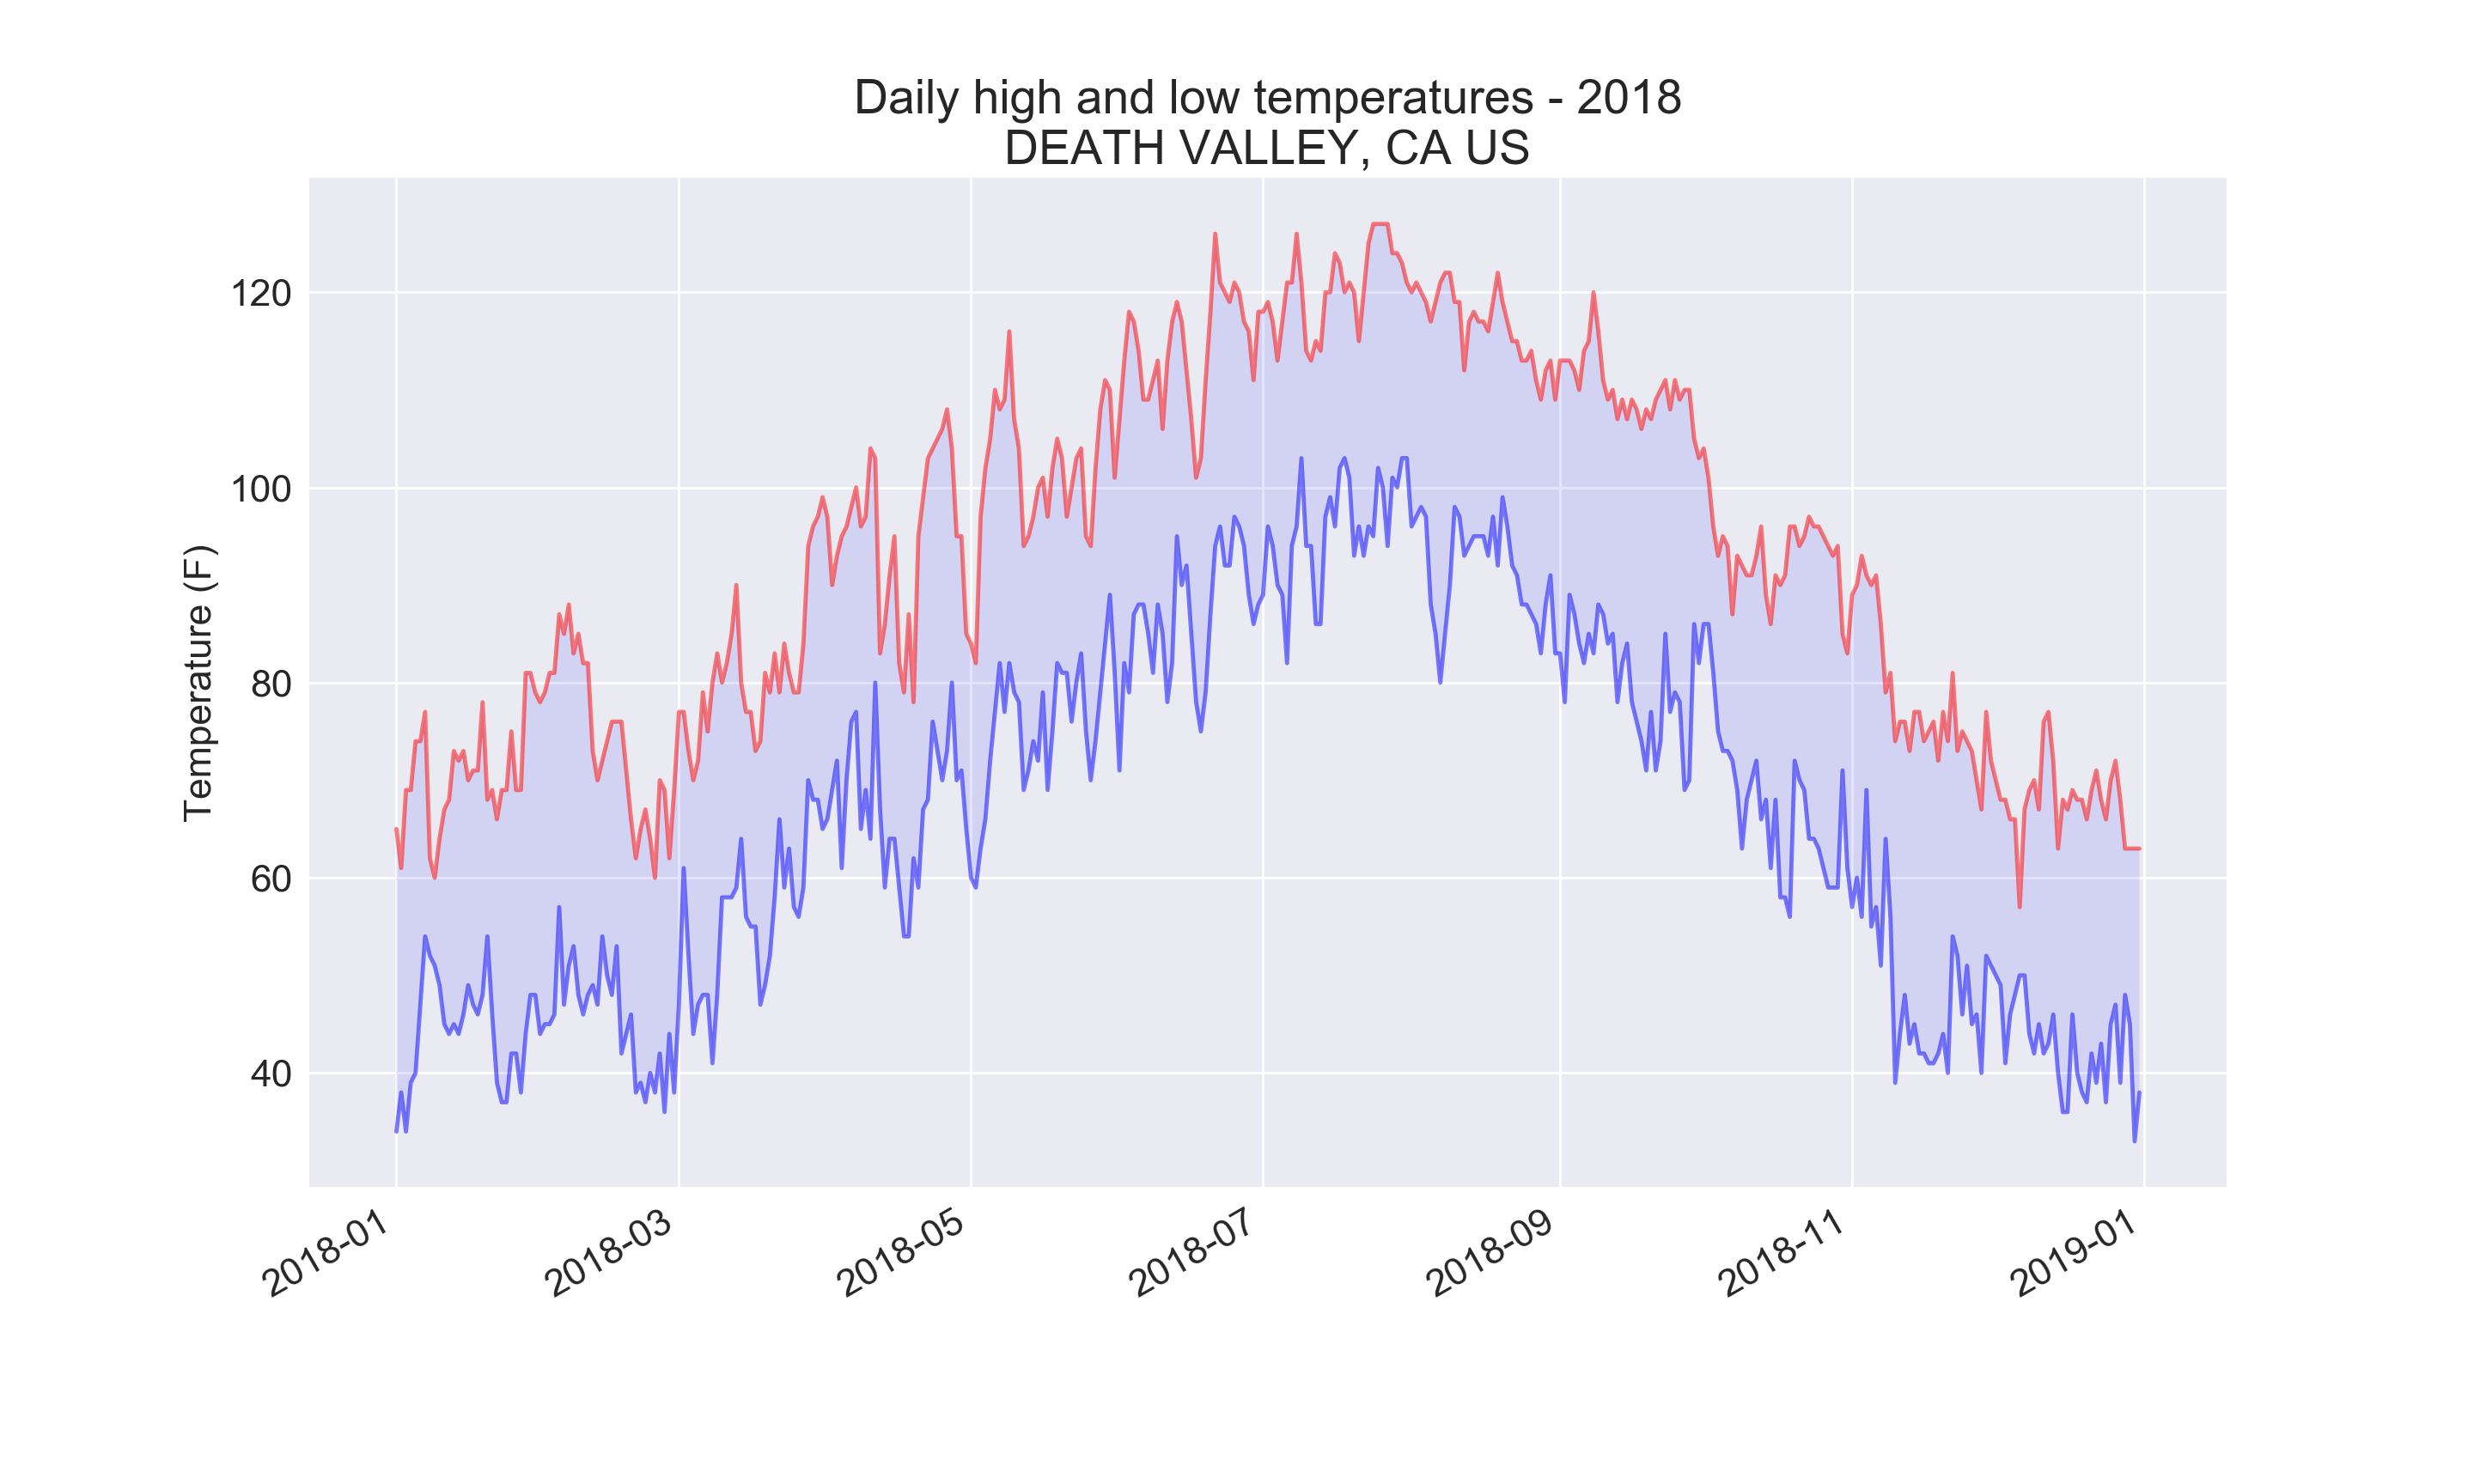 Daily high and low temperatures for Death Valley, CA for 2018